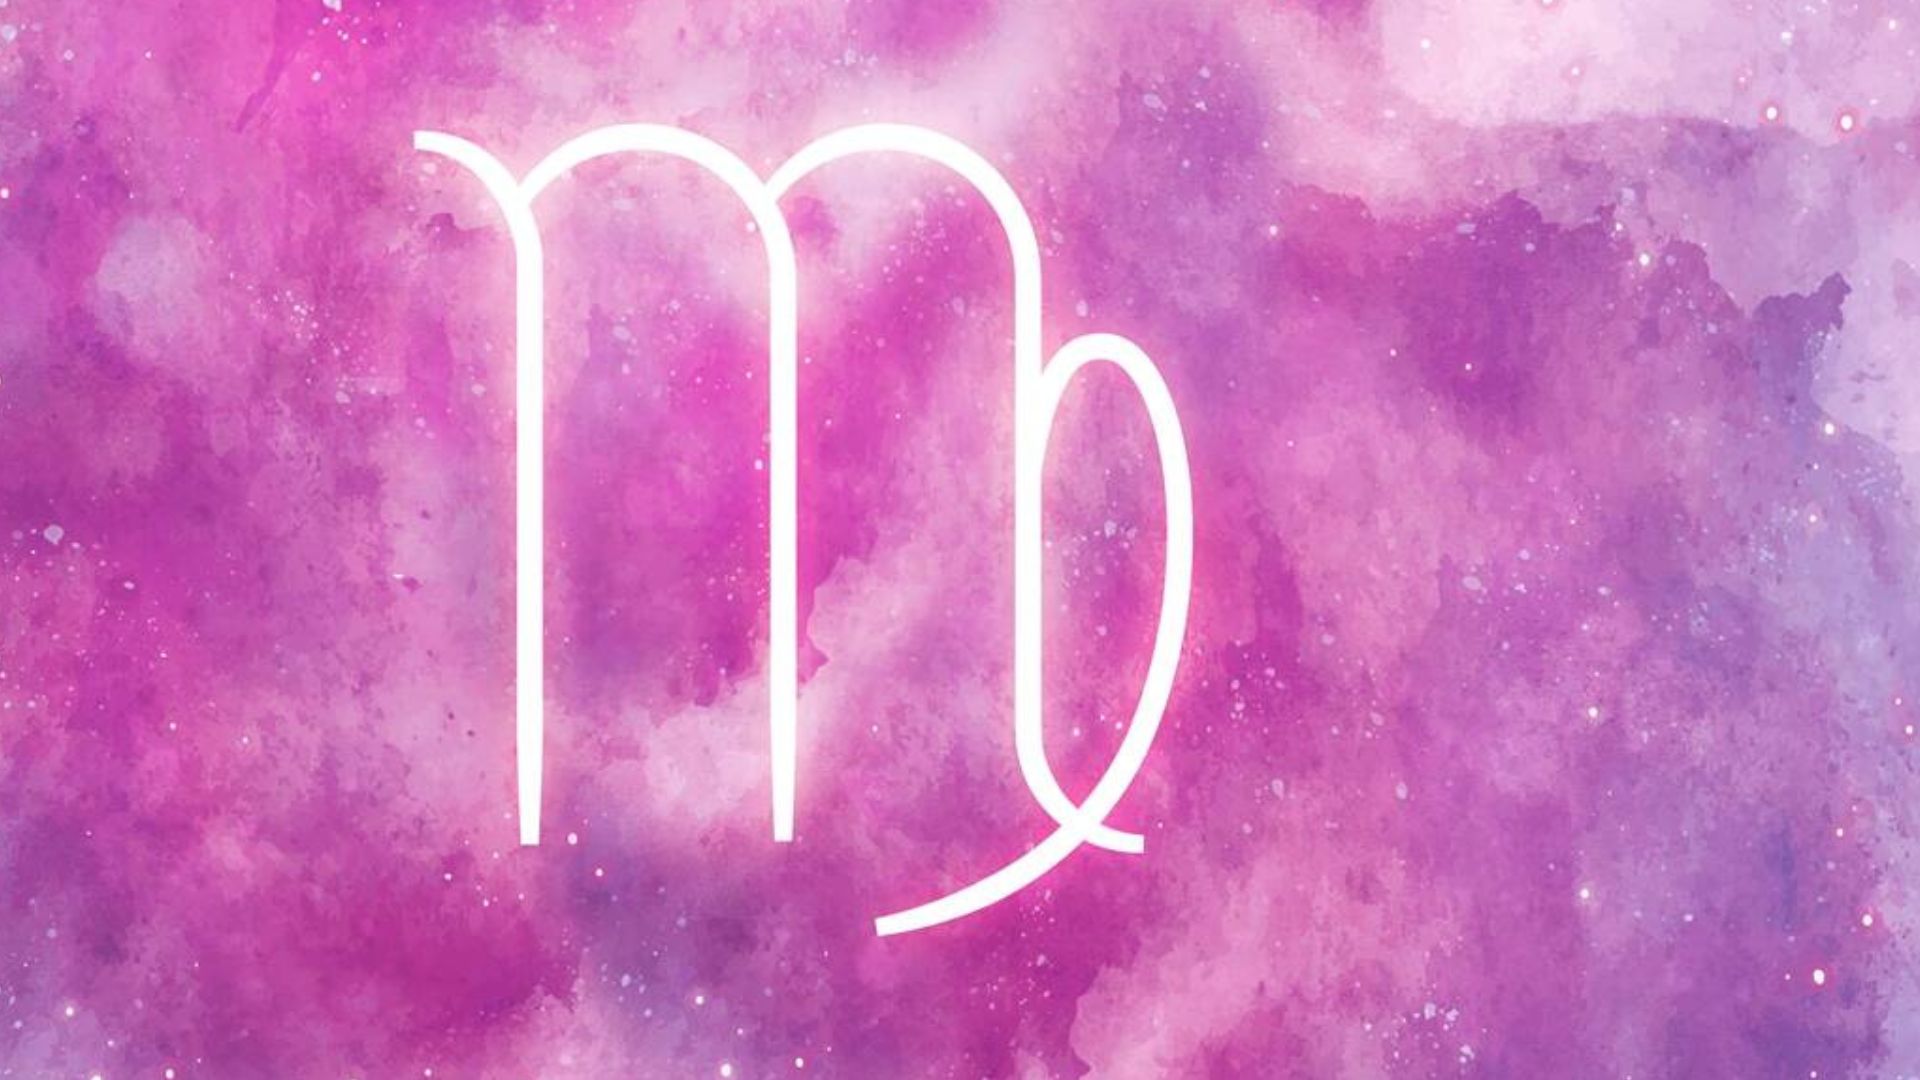 A Virgo Sign With Pink Background